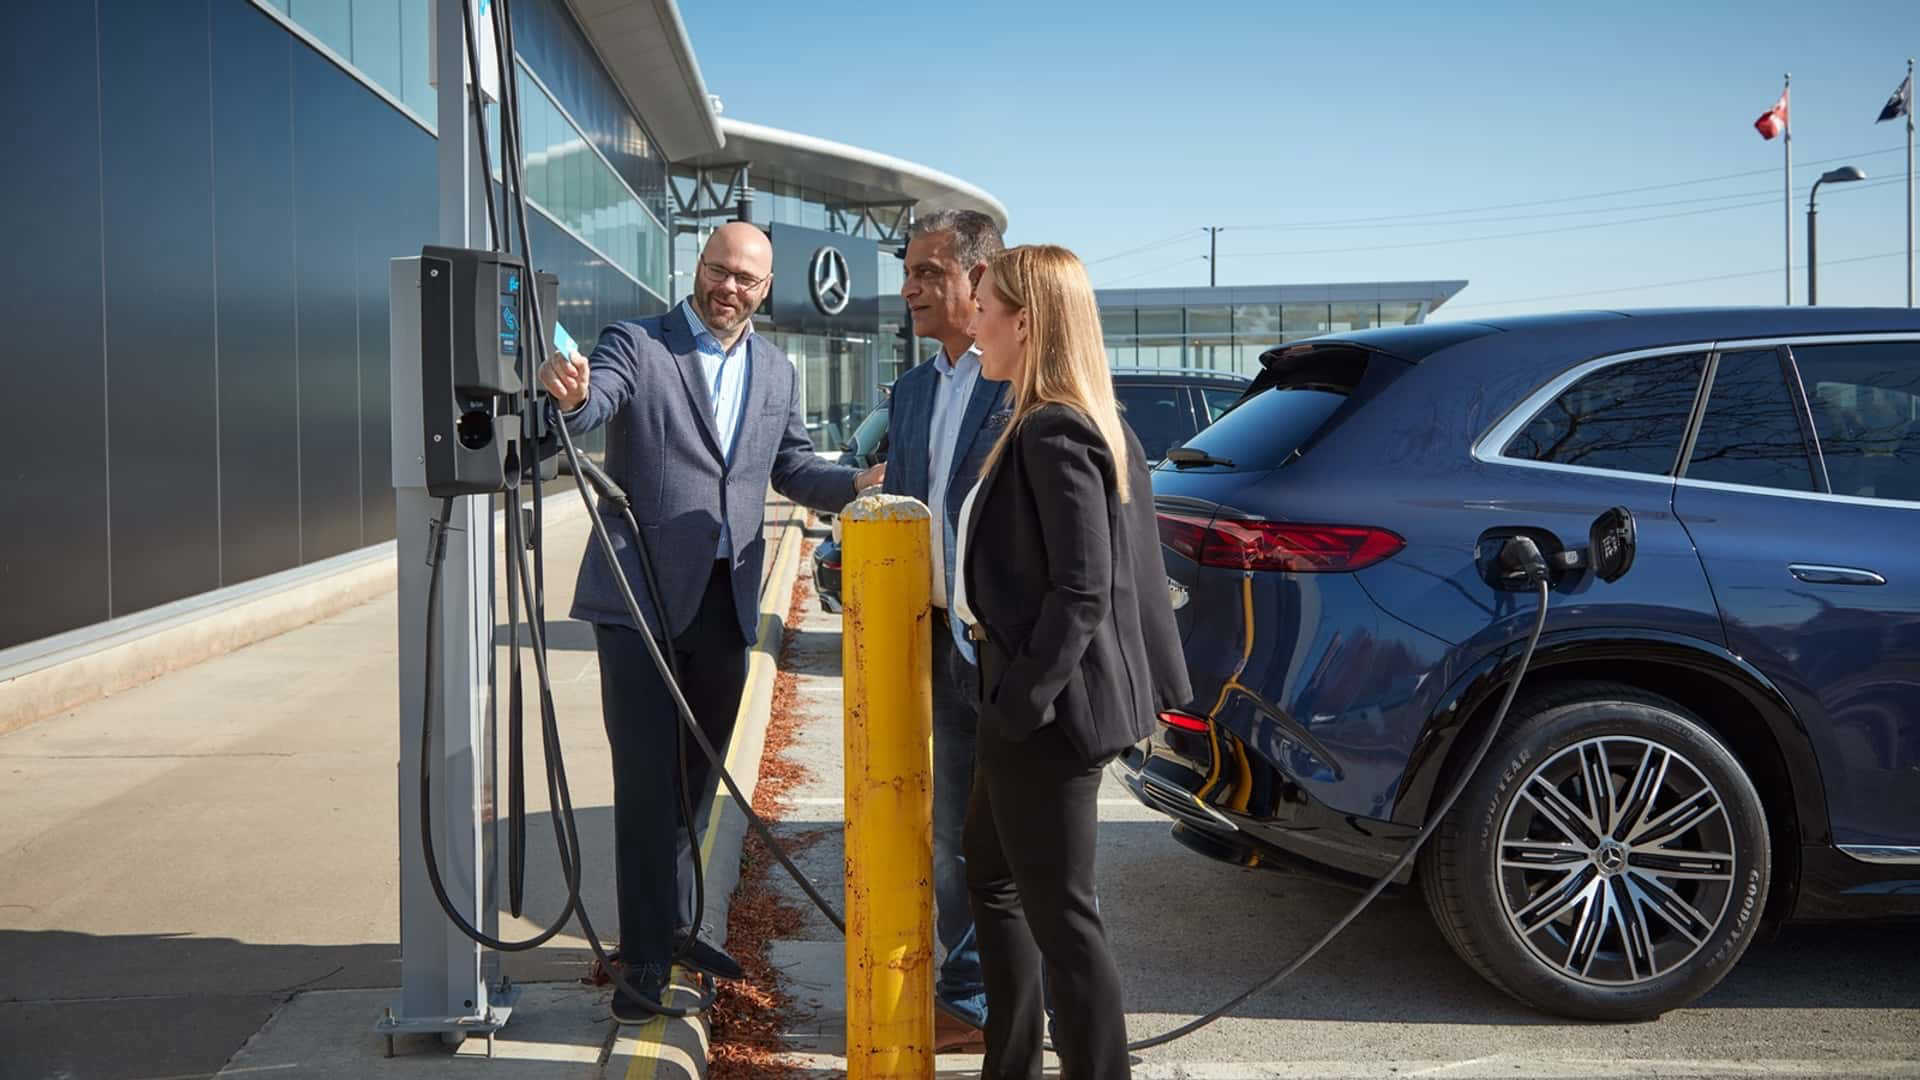 5 Myths About Electric Vehicles & Charging Debunked